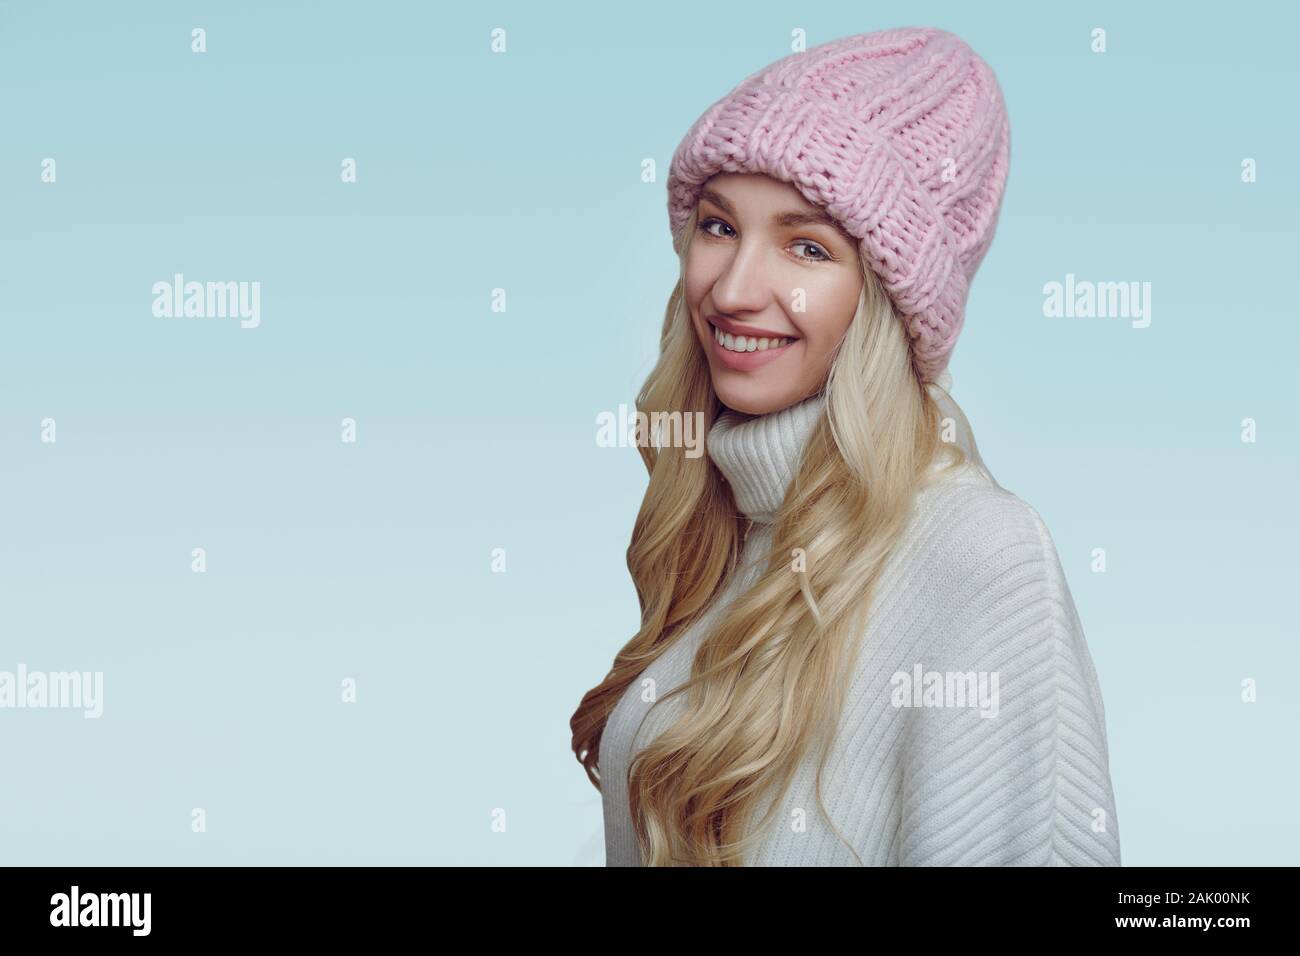 Happy young woman with long blond hair in pink knitted winter hat looking at the camera with a tourquoise background Stock Photo